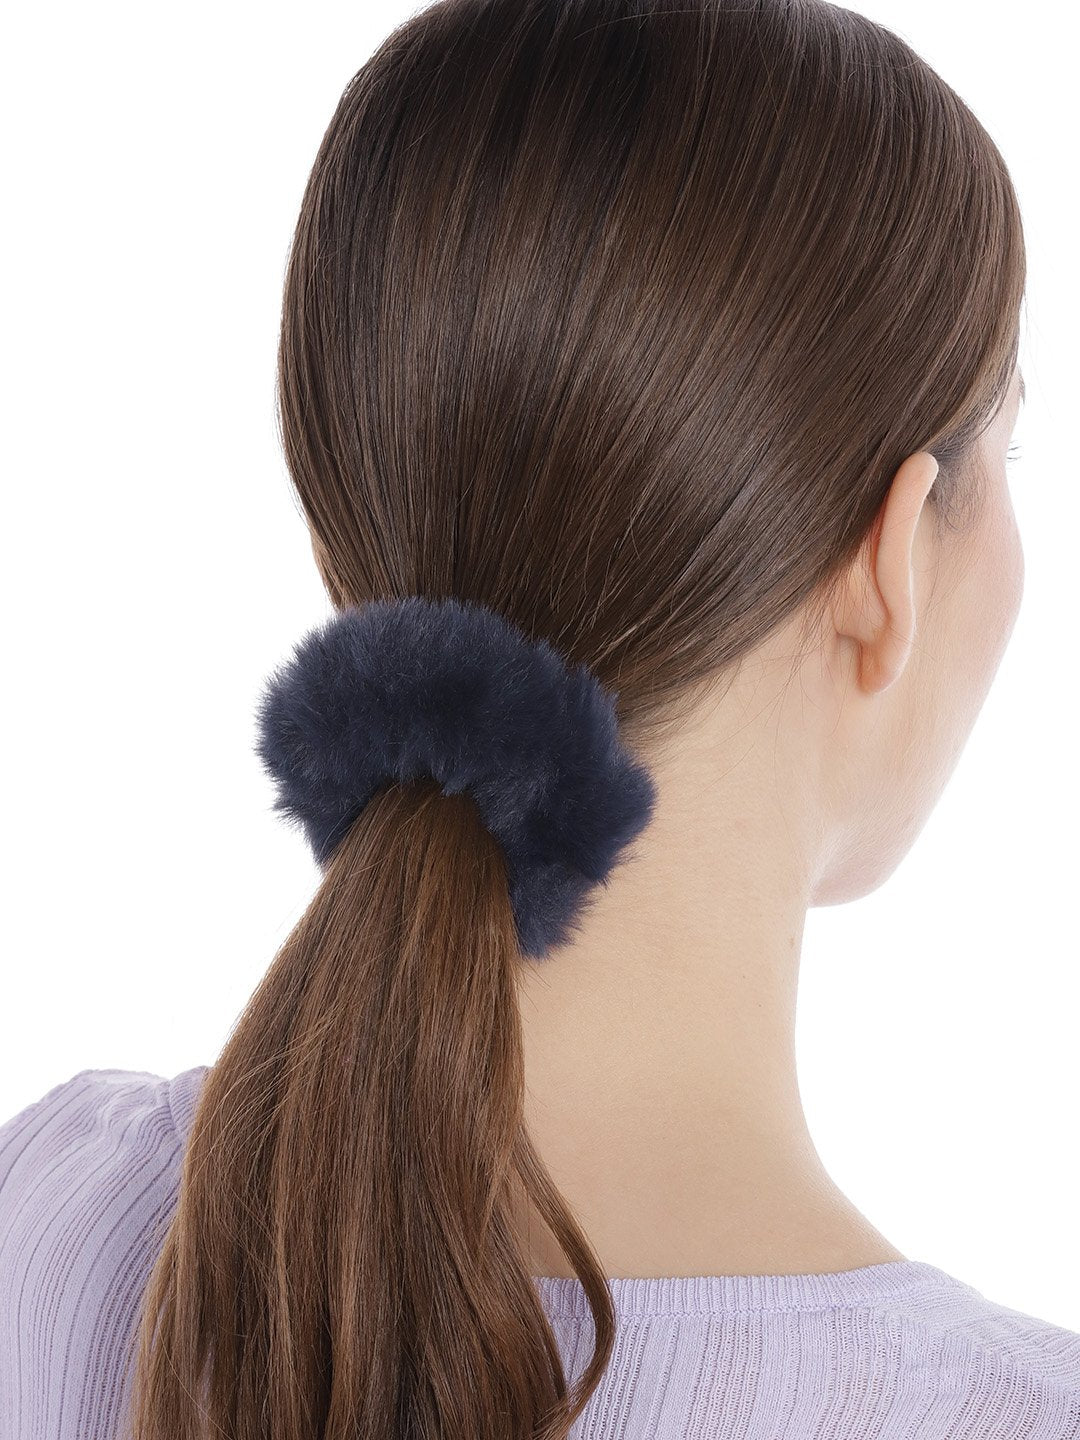 Blueberry set of 2 red and navy blue faux fur scrunchie